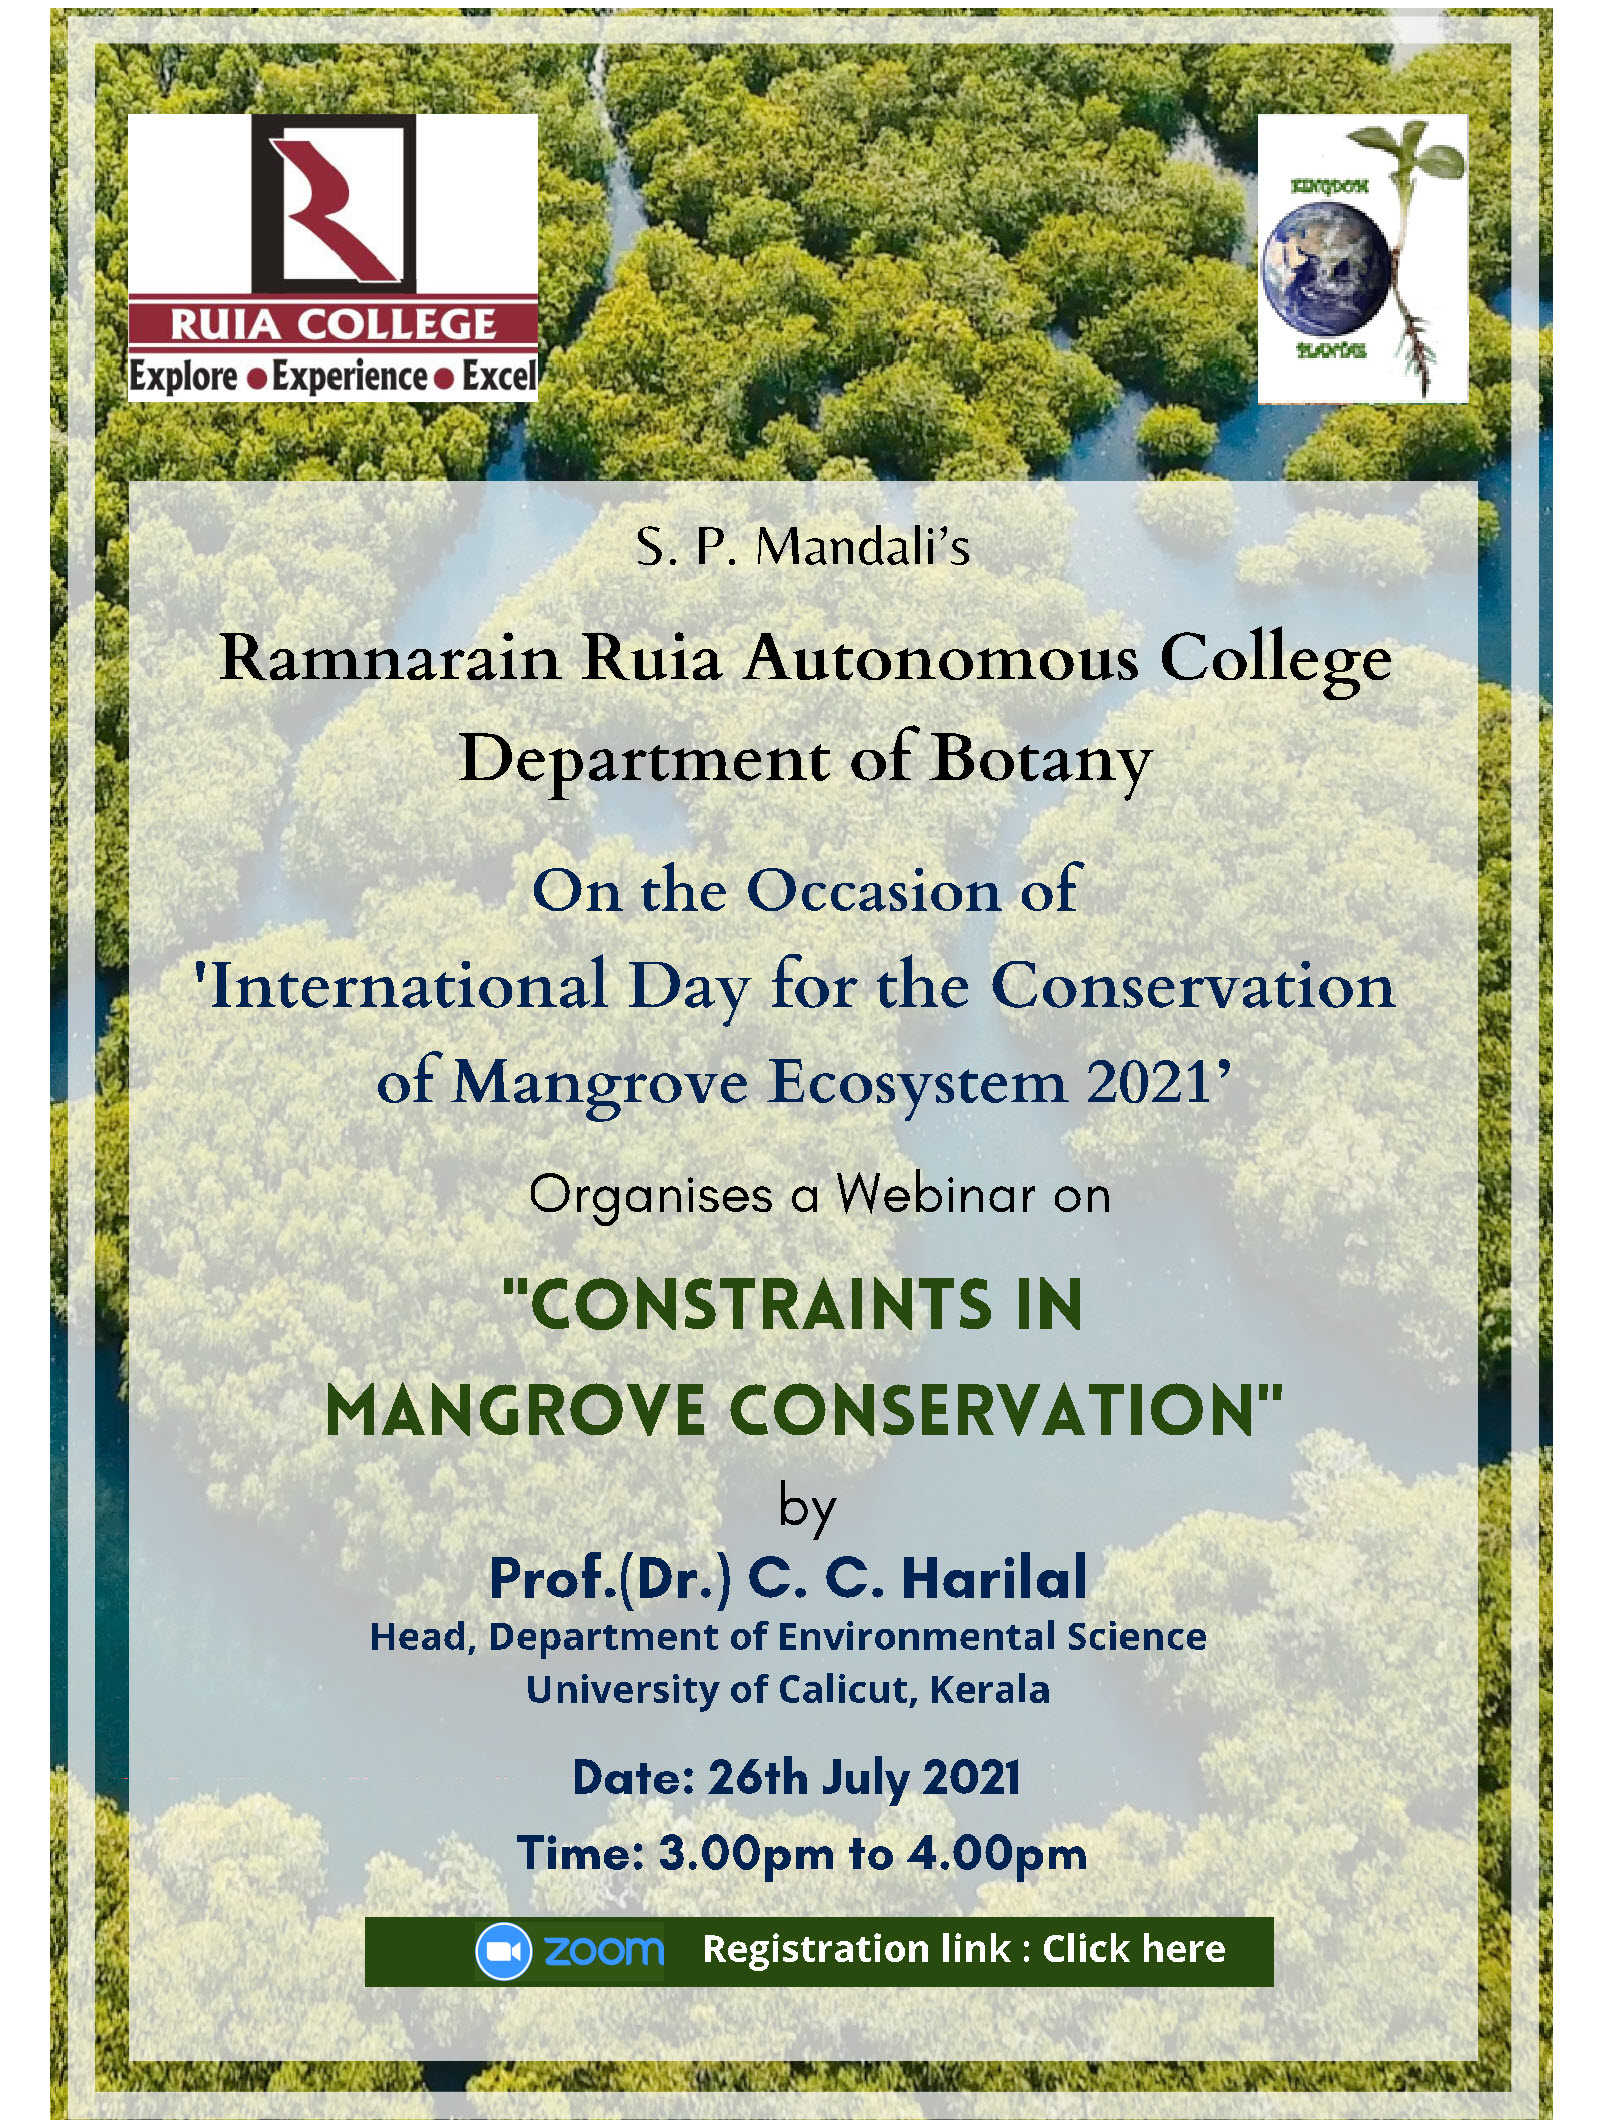  Celebrating ‘The International Day for the Conservation of the Mangrove Ecosystem’